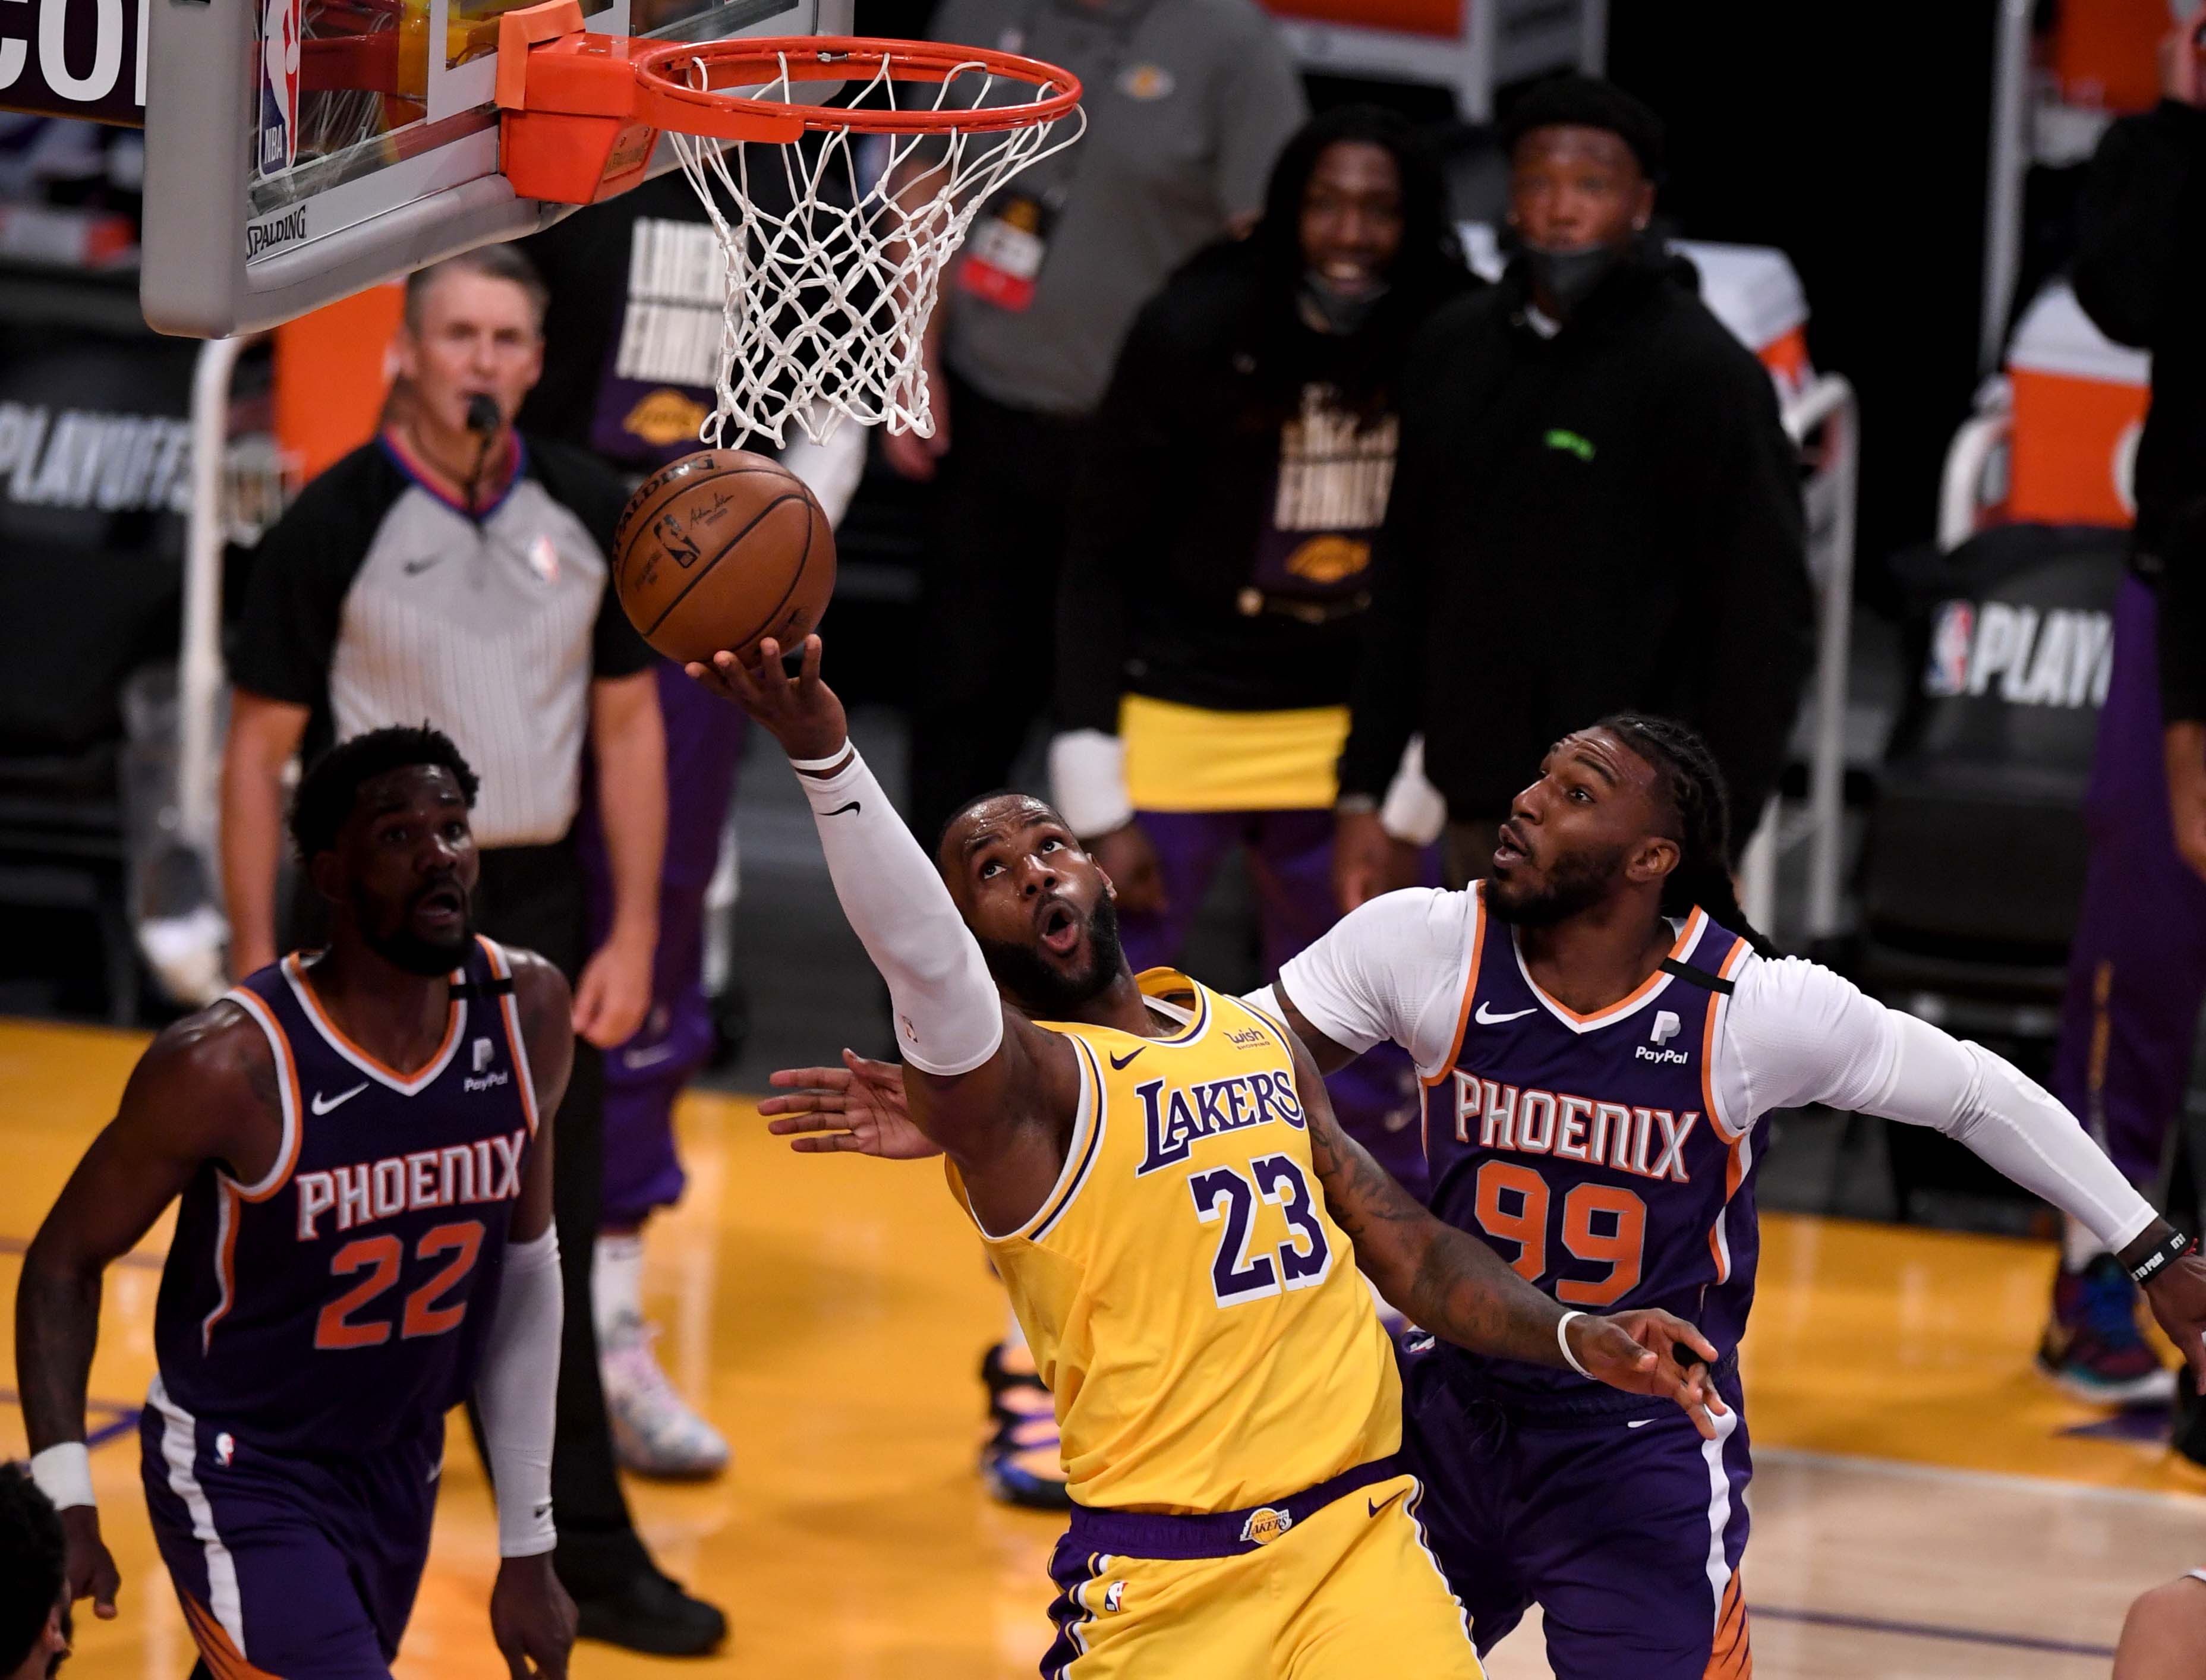 Los Angeles Lakers vs Phoenix Suns free live stream, Game 4 score, odds, time, TV channel, how to watch NBA playoffs online (5/30/21)